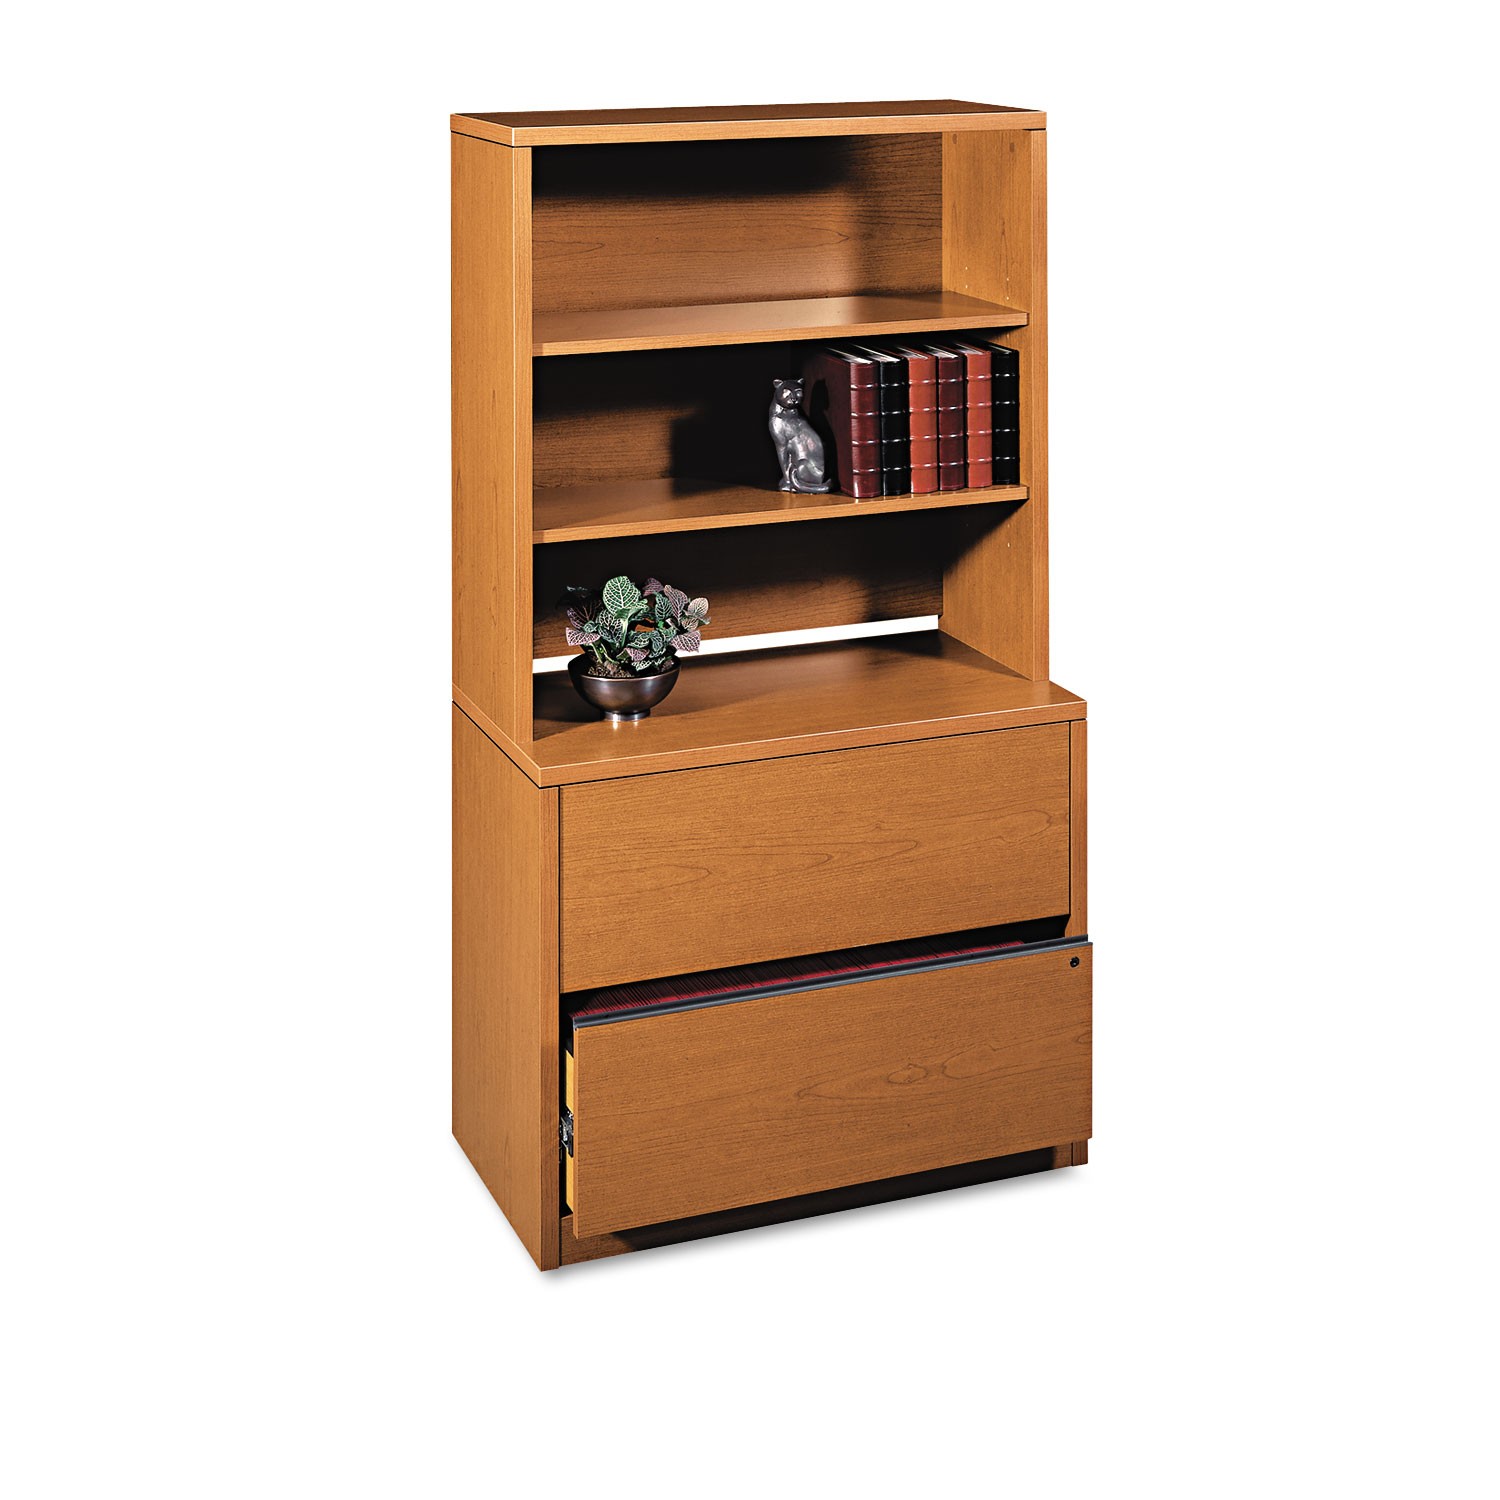 10500 Series Two-Drawer Lateral File, 36w x 20d x 29-1/2h, Bourbon Cherry